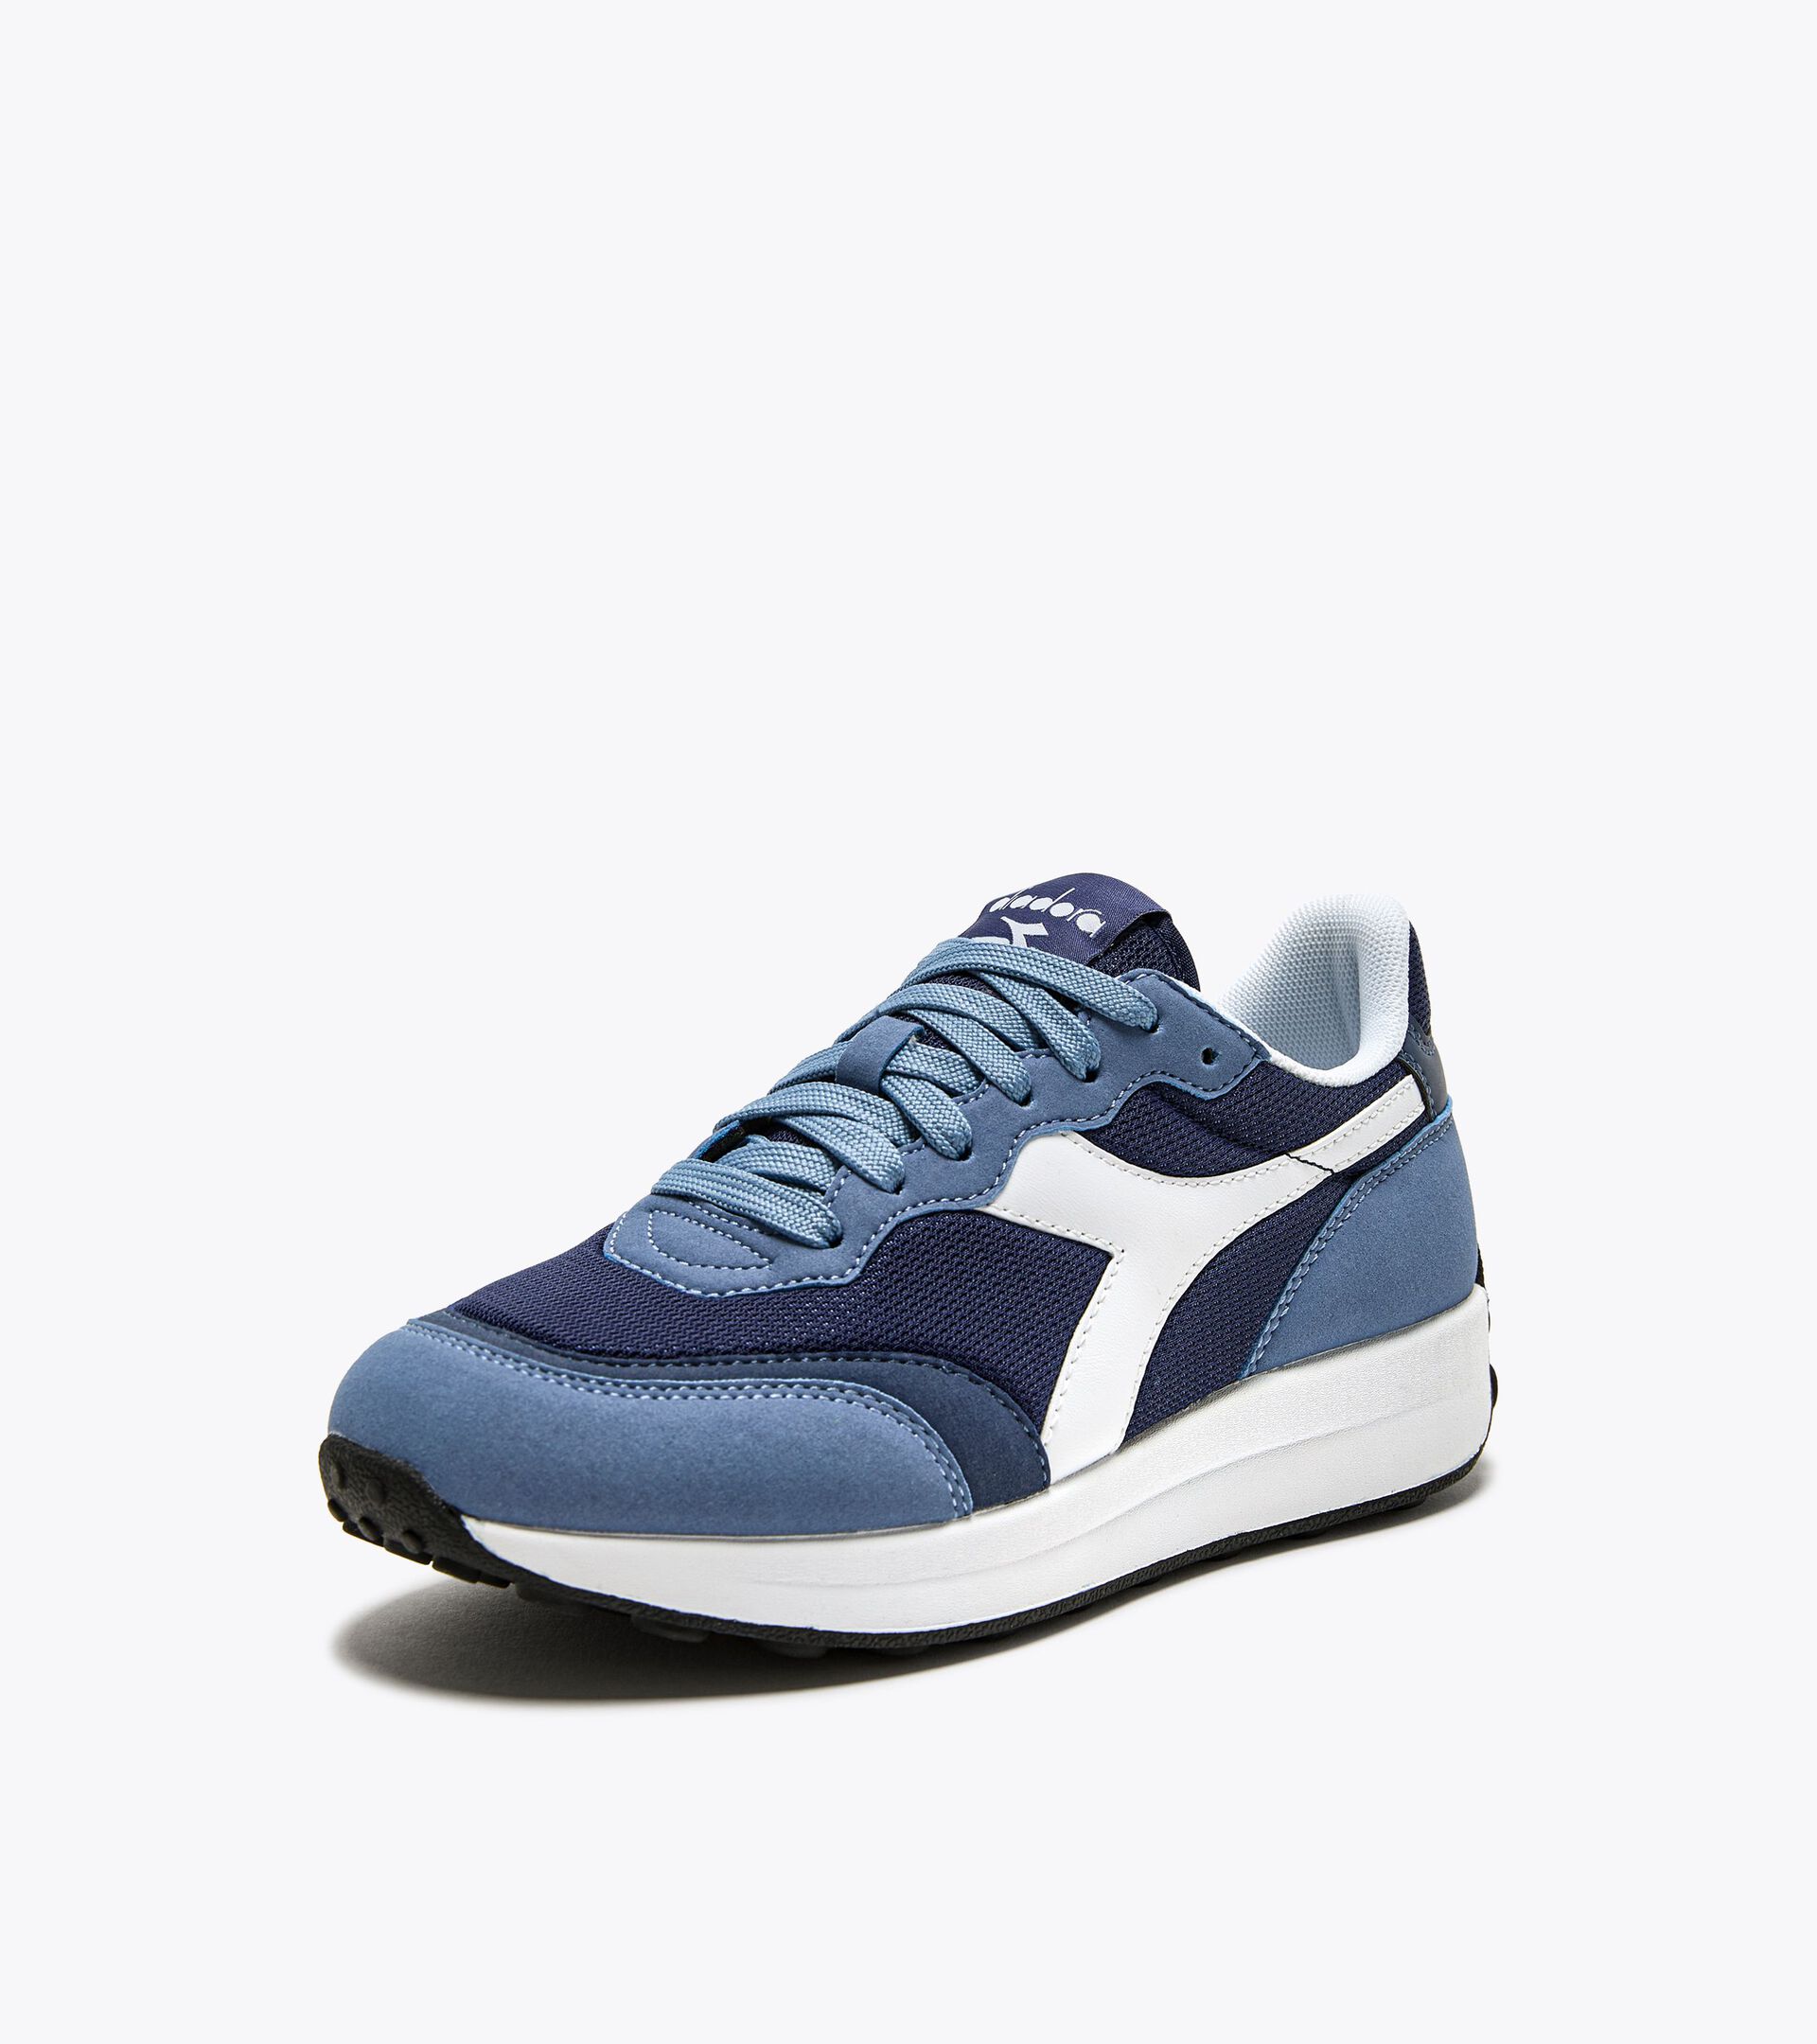 Sports shoes - Youth 8-16 years - Gender Neutral RACE GS STONEWASH/WHITE - Diadora